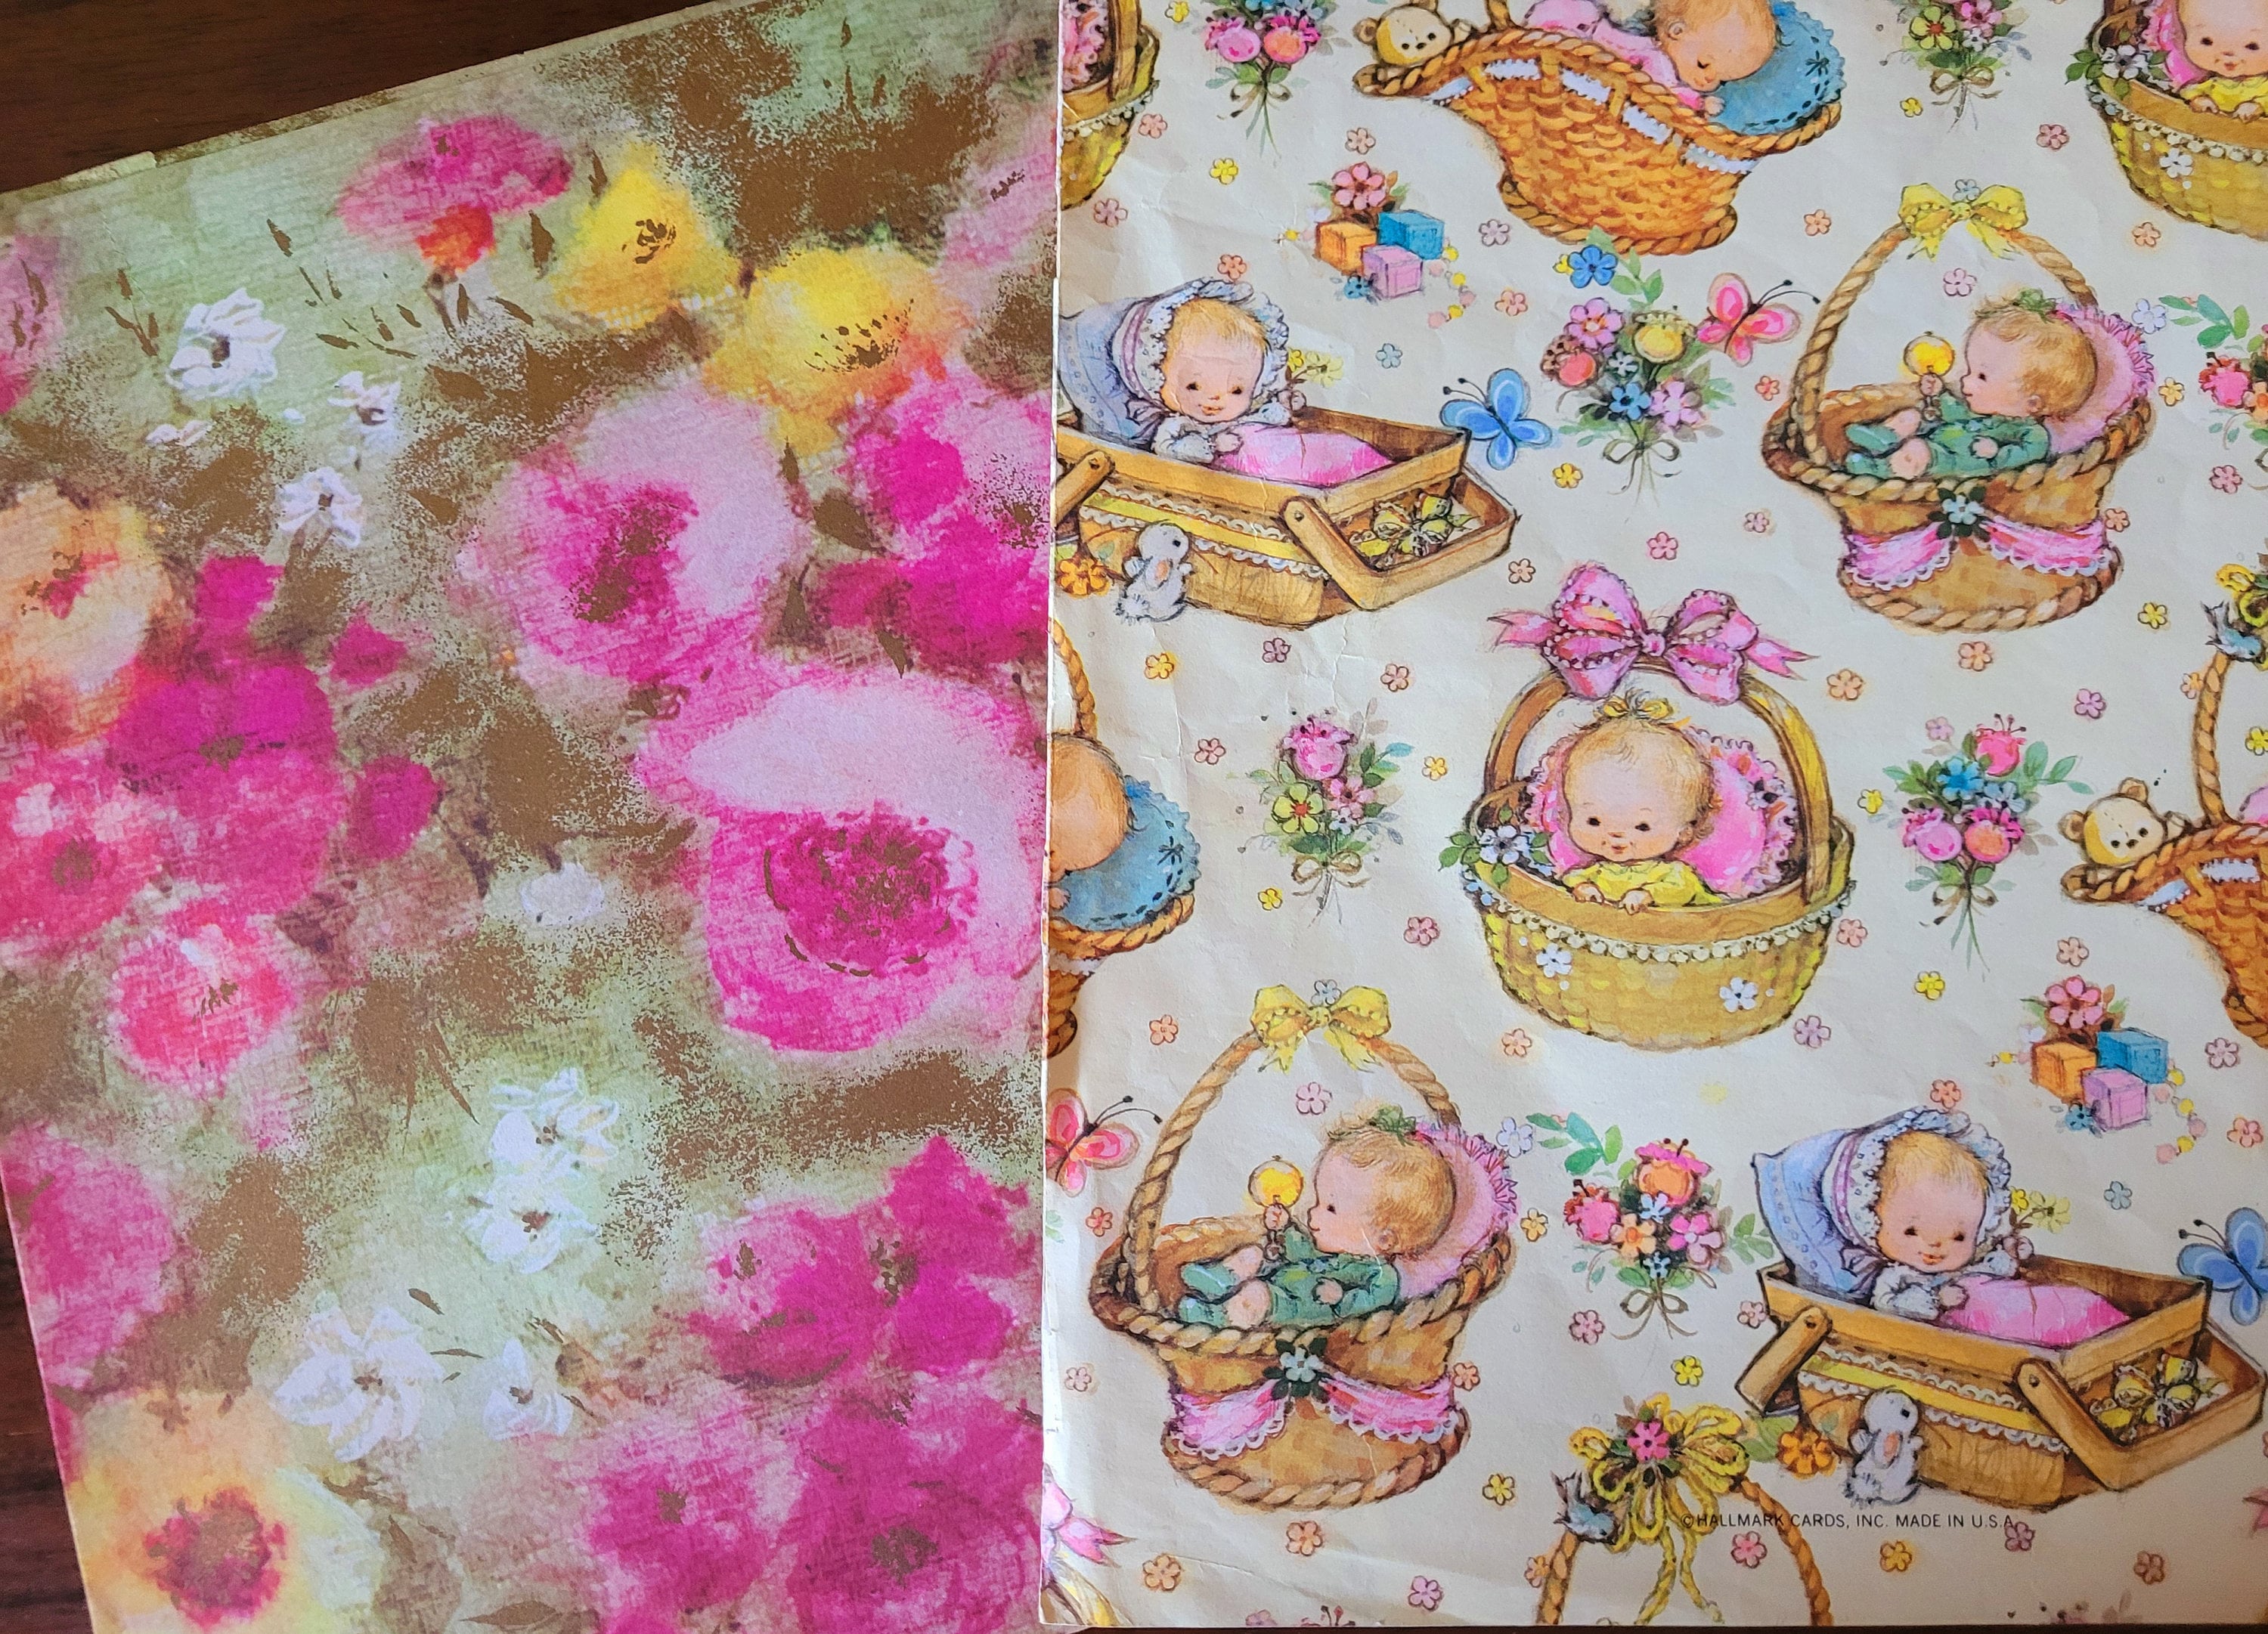 Hallmark Wrapping Paper. Bridal Shower Gift Wrap. Vintage Wrapping